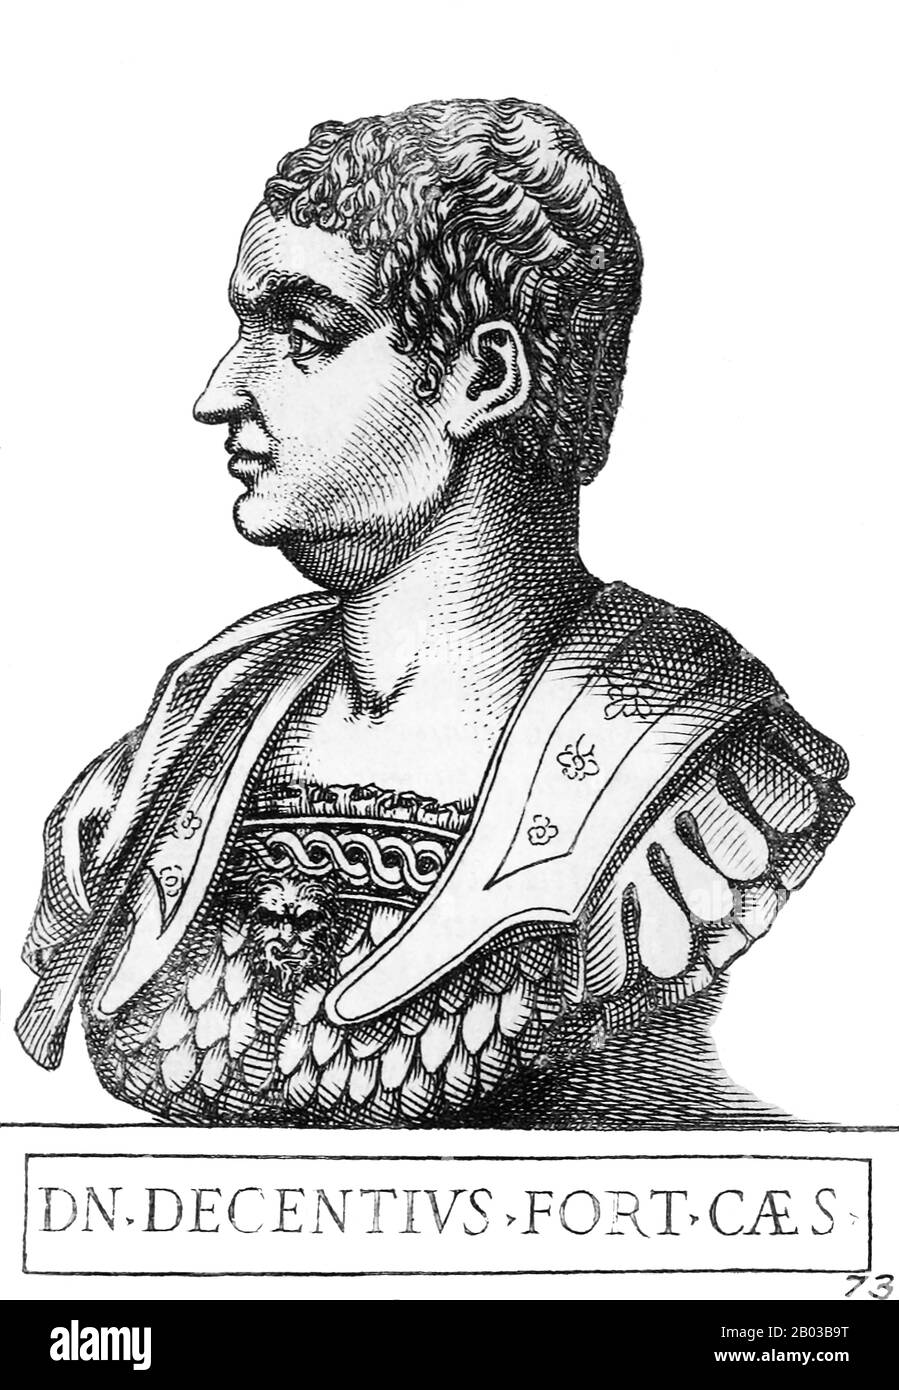 Magnus Decentius (-353) was possibly the brother of the usurper Magnentius, who murdered Emperor Constans and revolted against Emperor Constantius II in 350. When Magnentius was busy fighting against Constantius II, he elevated Decentius to Caesar and co-emperor to aid him, ordering him to oversee the defence of Gaul and the Rhine frontier. Stock Photo